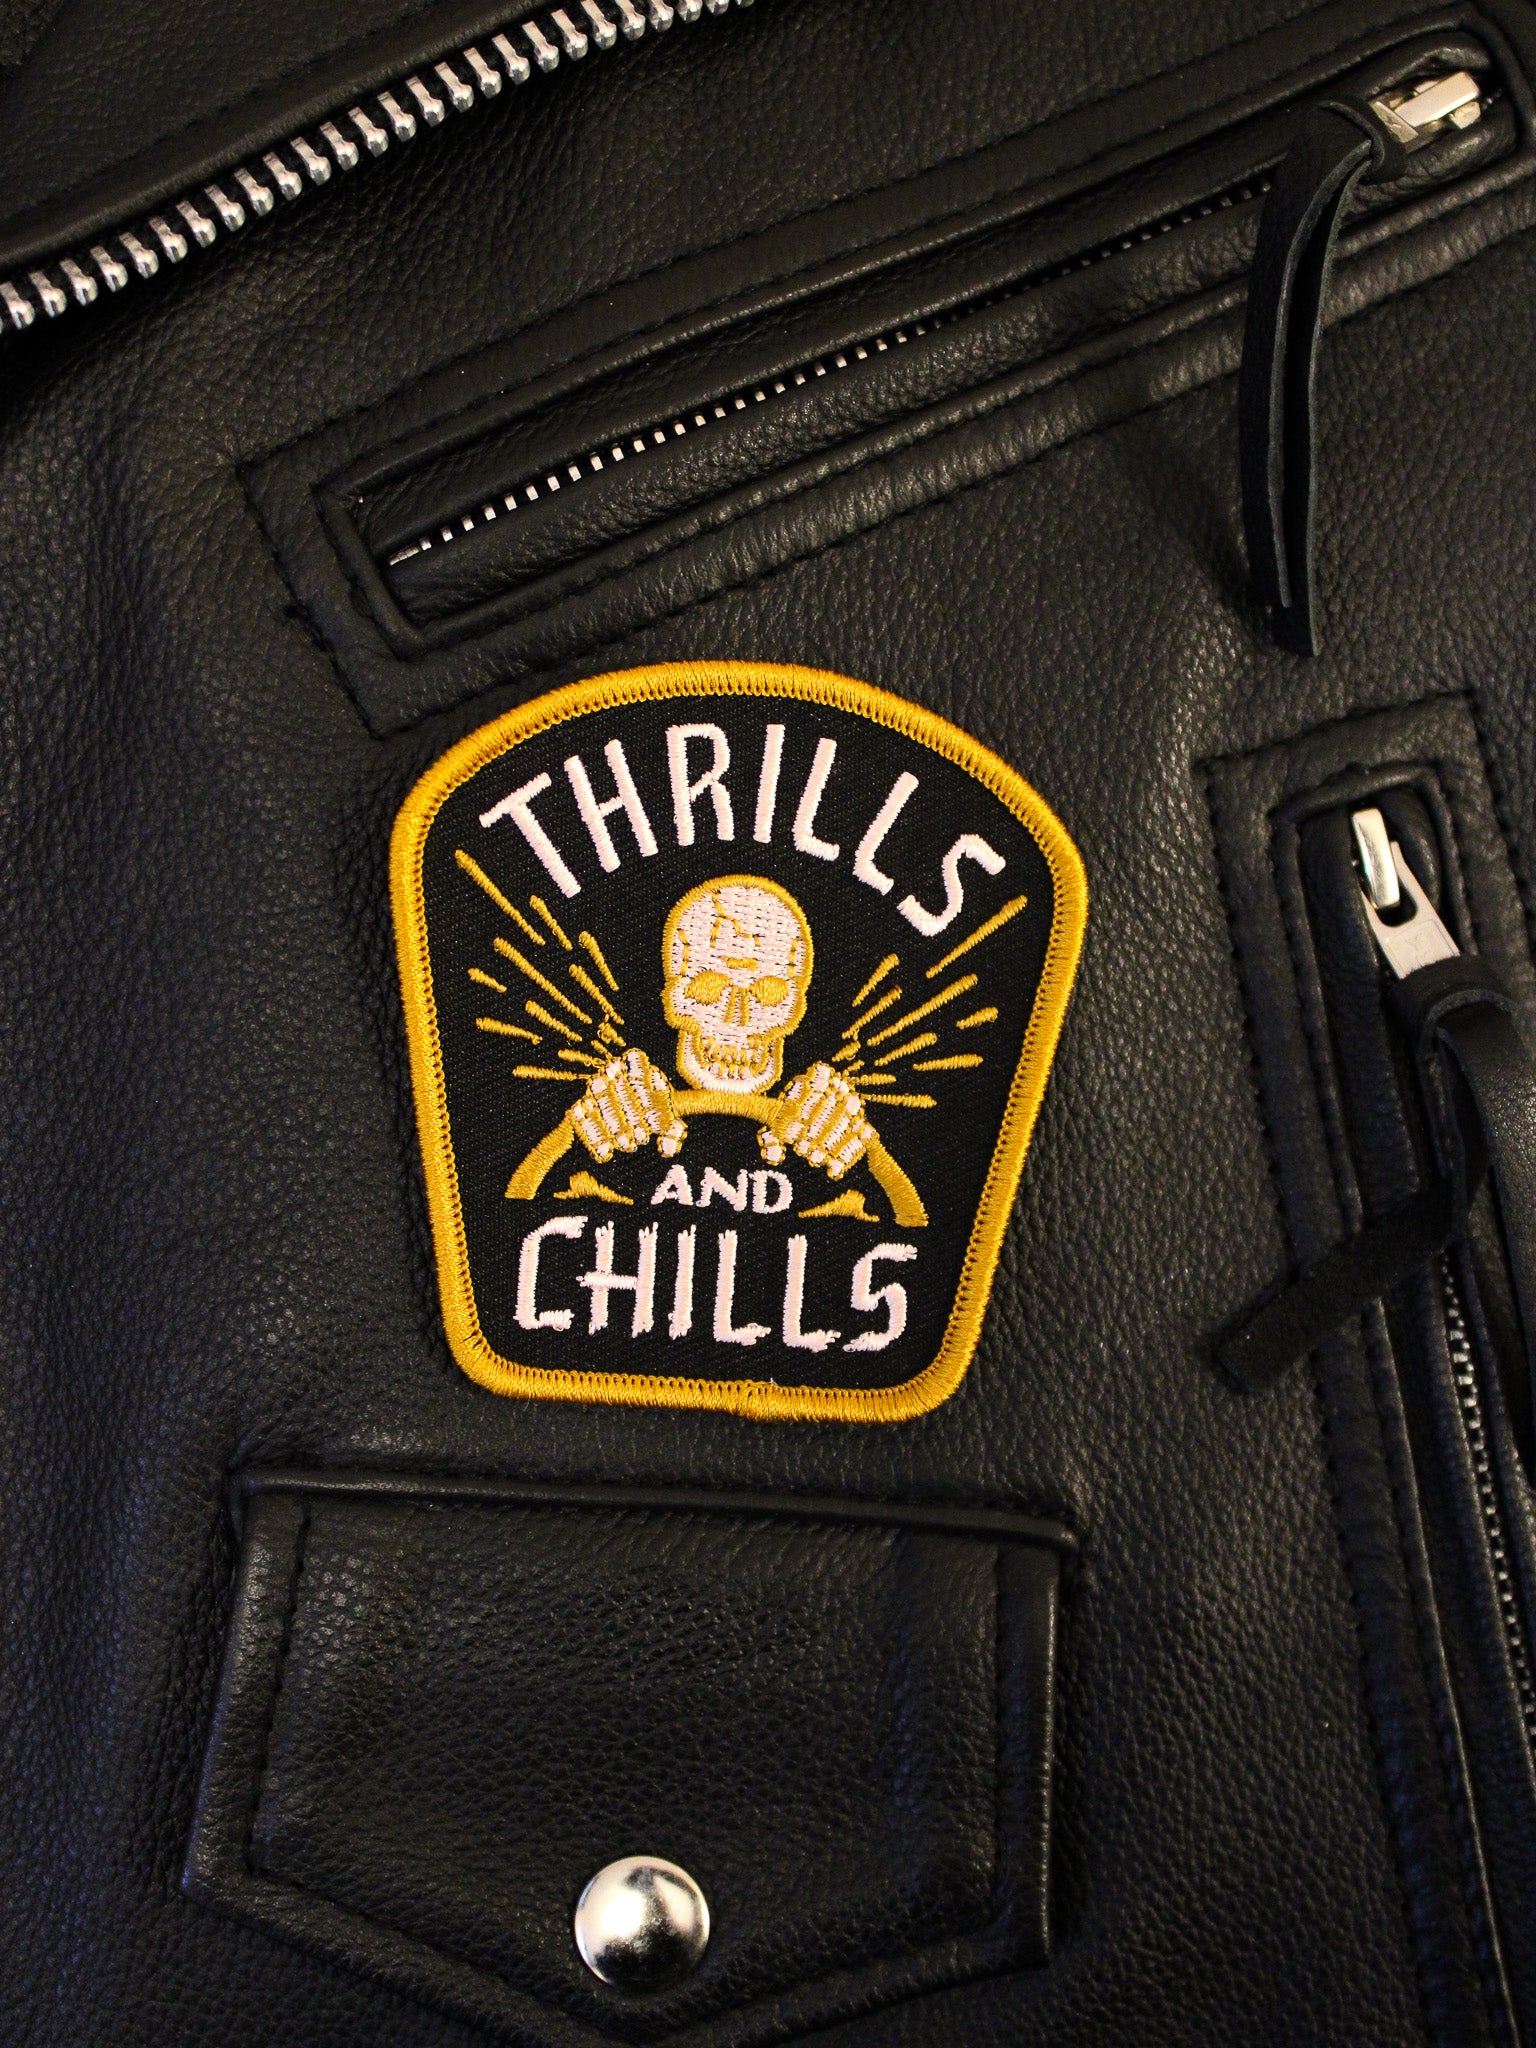 Thrills and Chills Patch